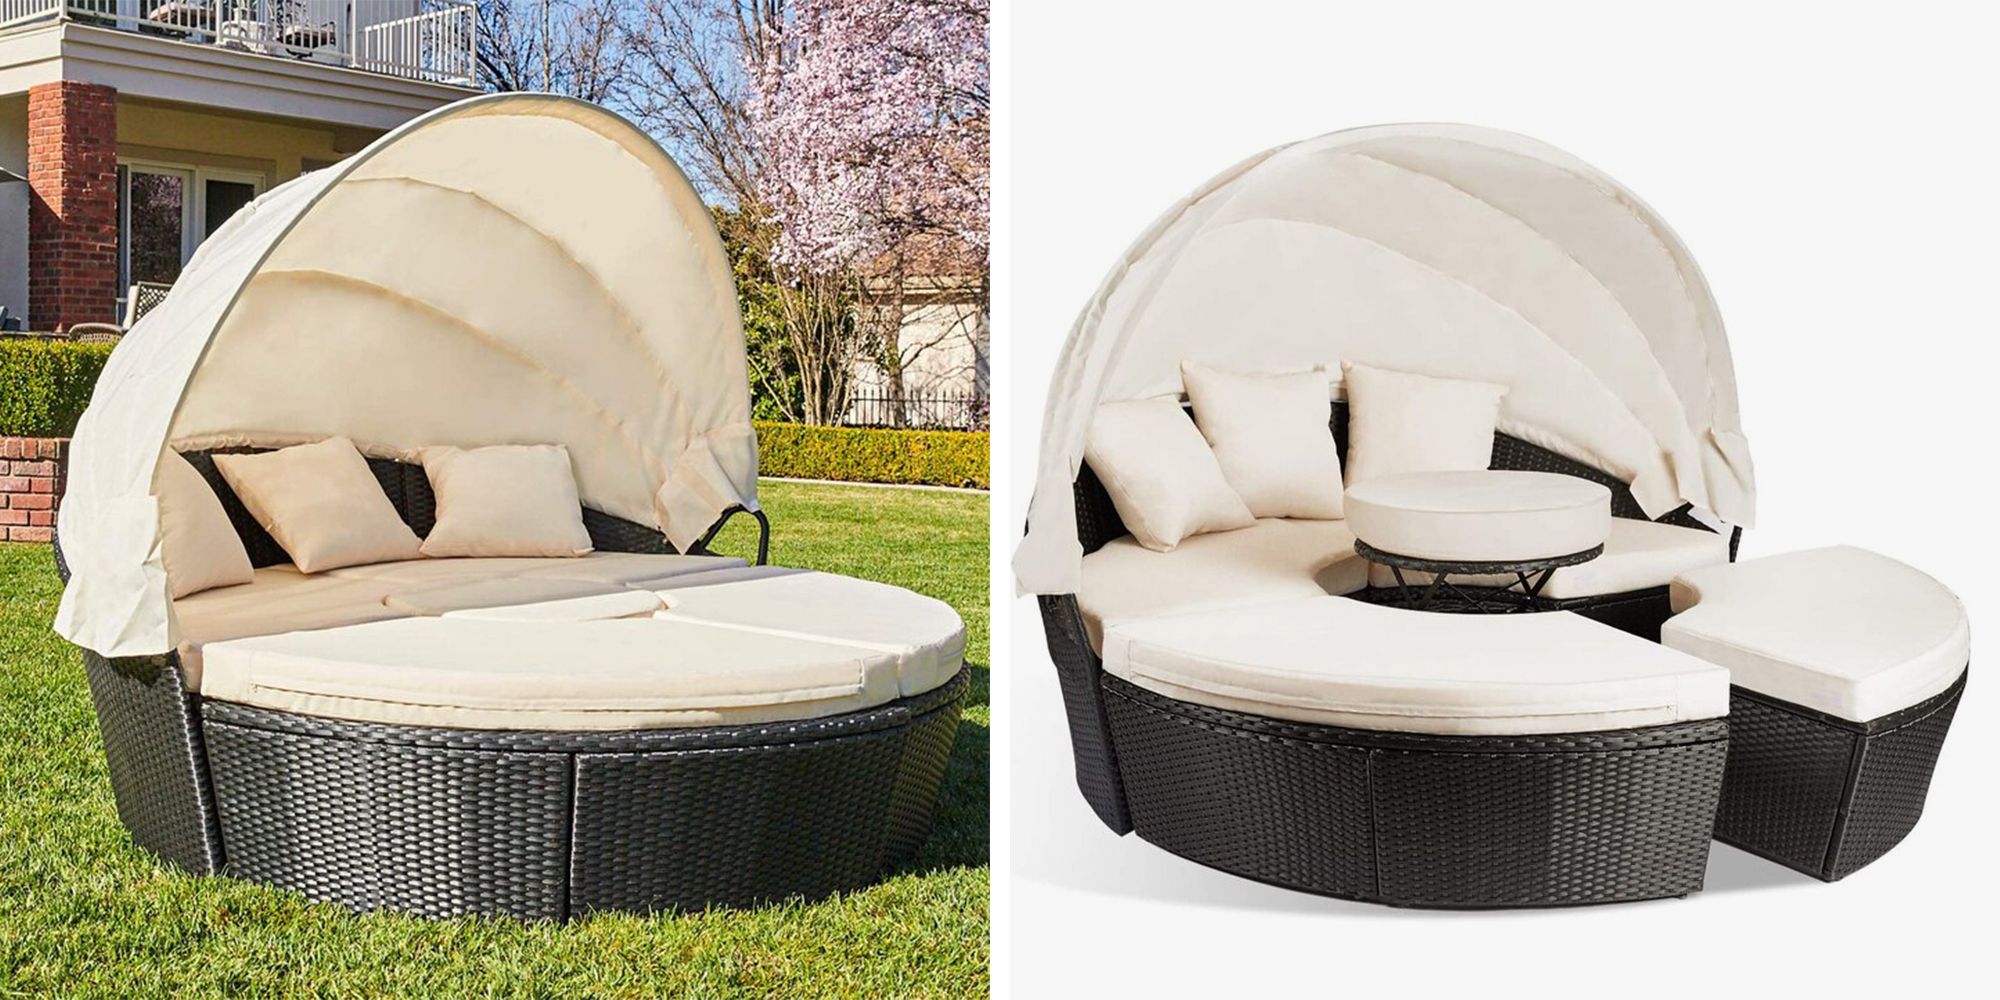 This Cabana Daybed Transforms From A Lounging Spot To Multiple Seats And A Table